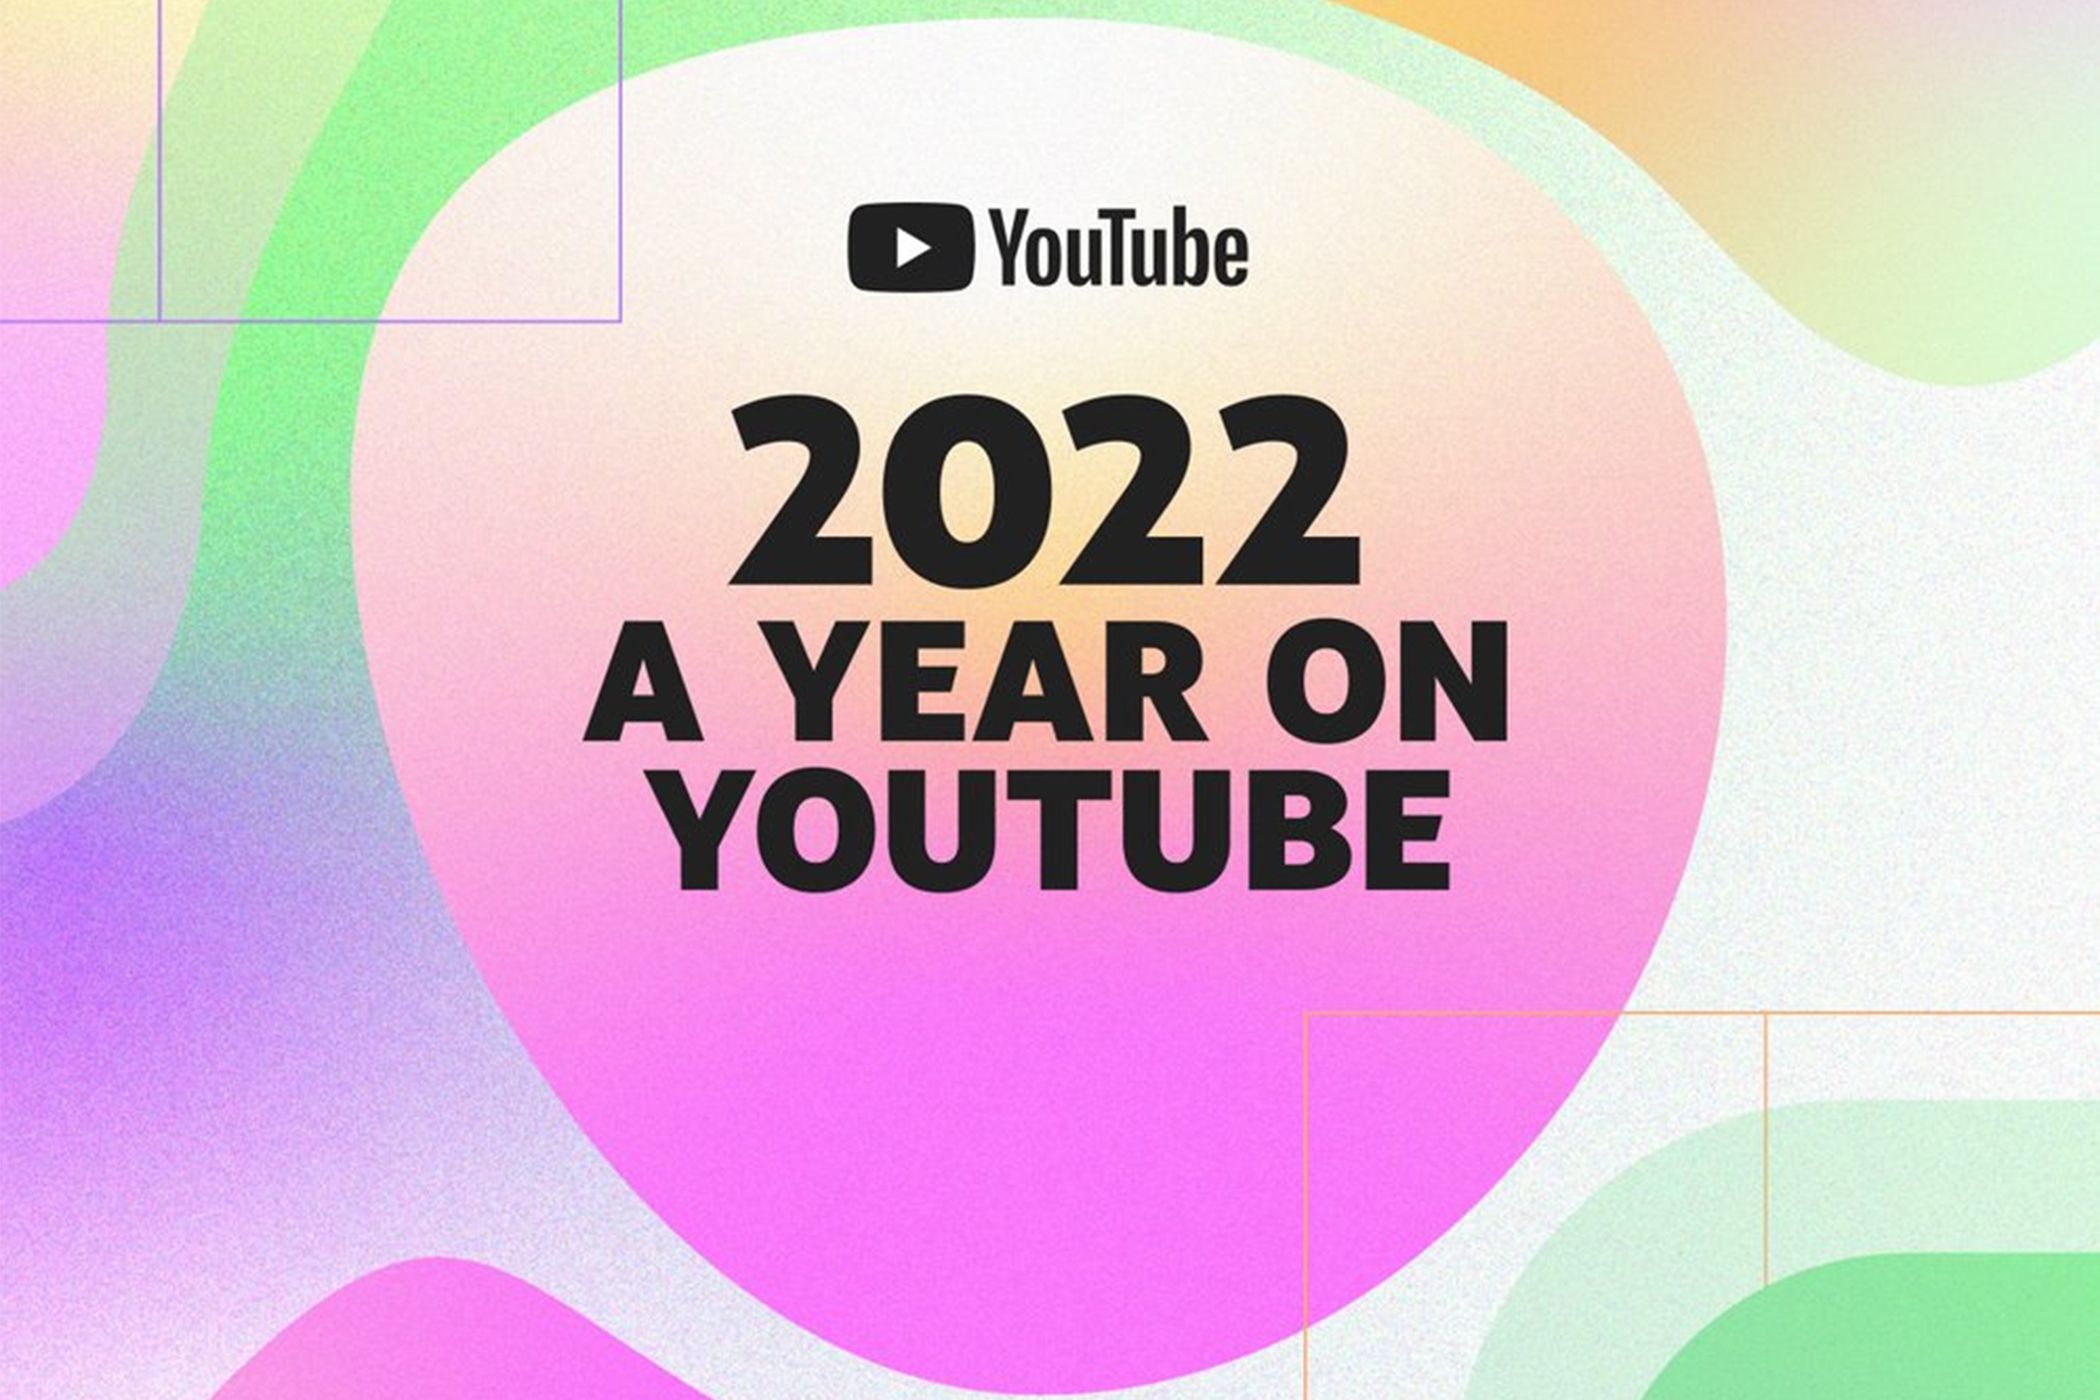 Colorful illustration with YouTube logo and text saying 2022 a year on youtube.